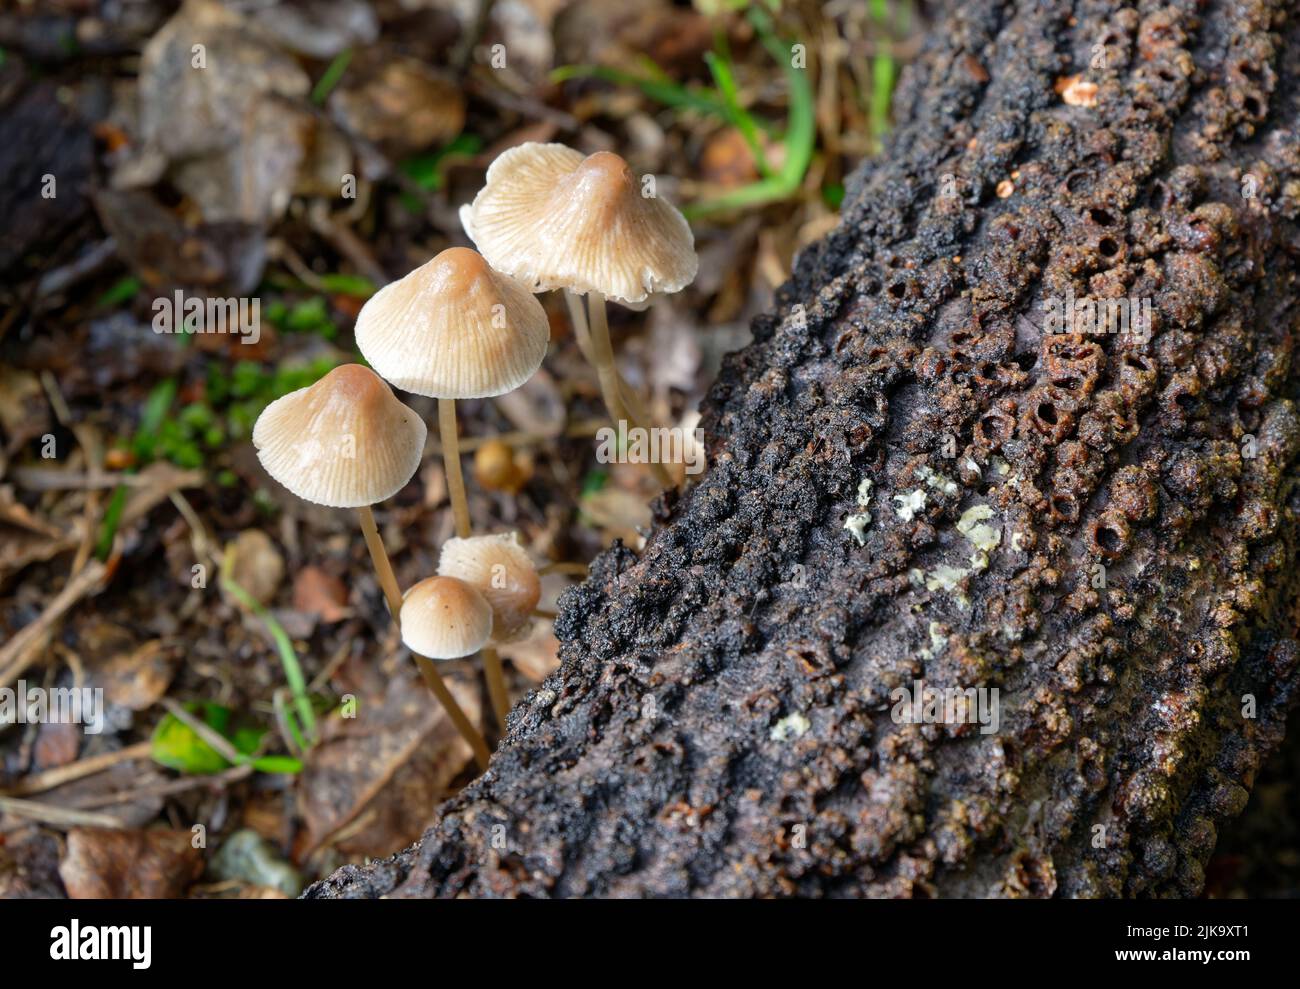 The very pretty mushroom species commonly known as the common bonnet, the toque mycena, or the rosy-gill fairy helmet grows on a fallen tree trunk. Stock Photo